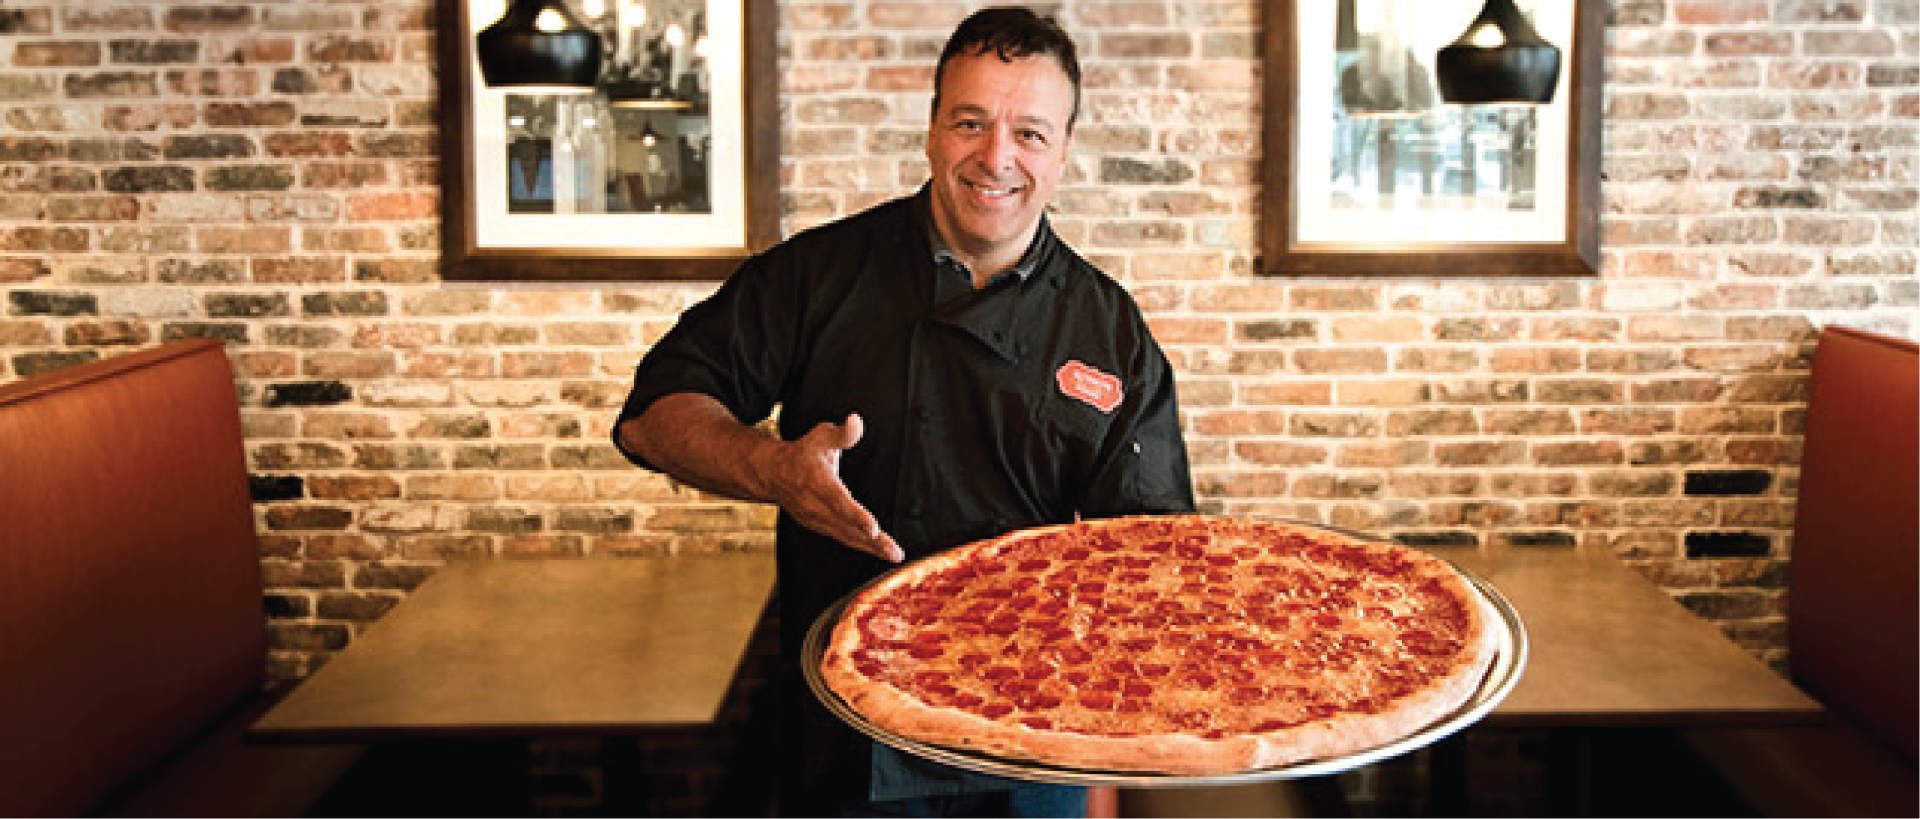 Chef Russo Holding Large Party Pizza